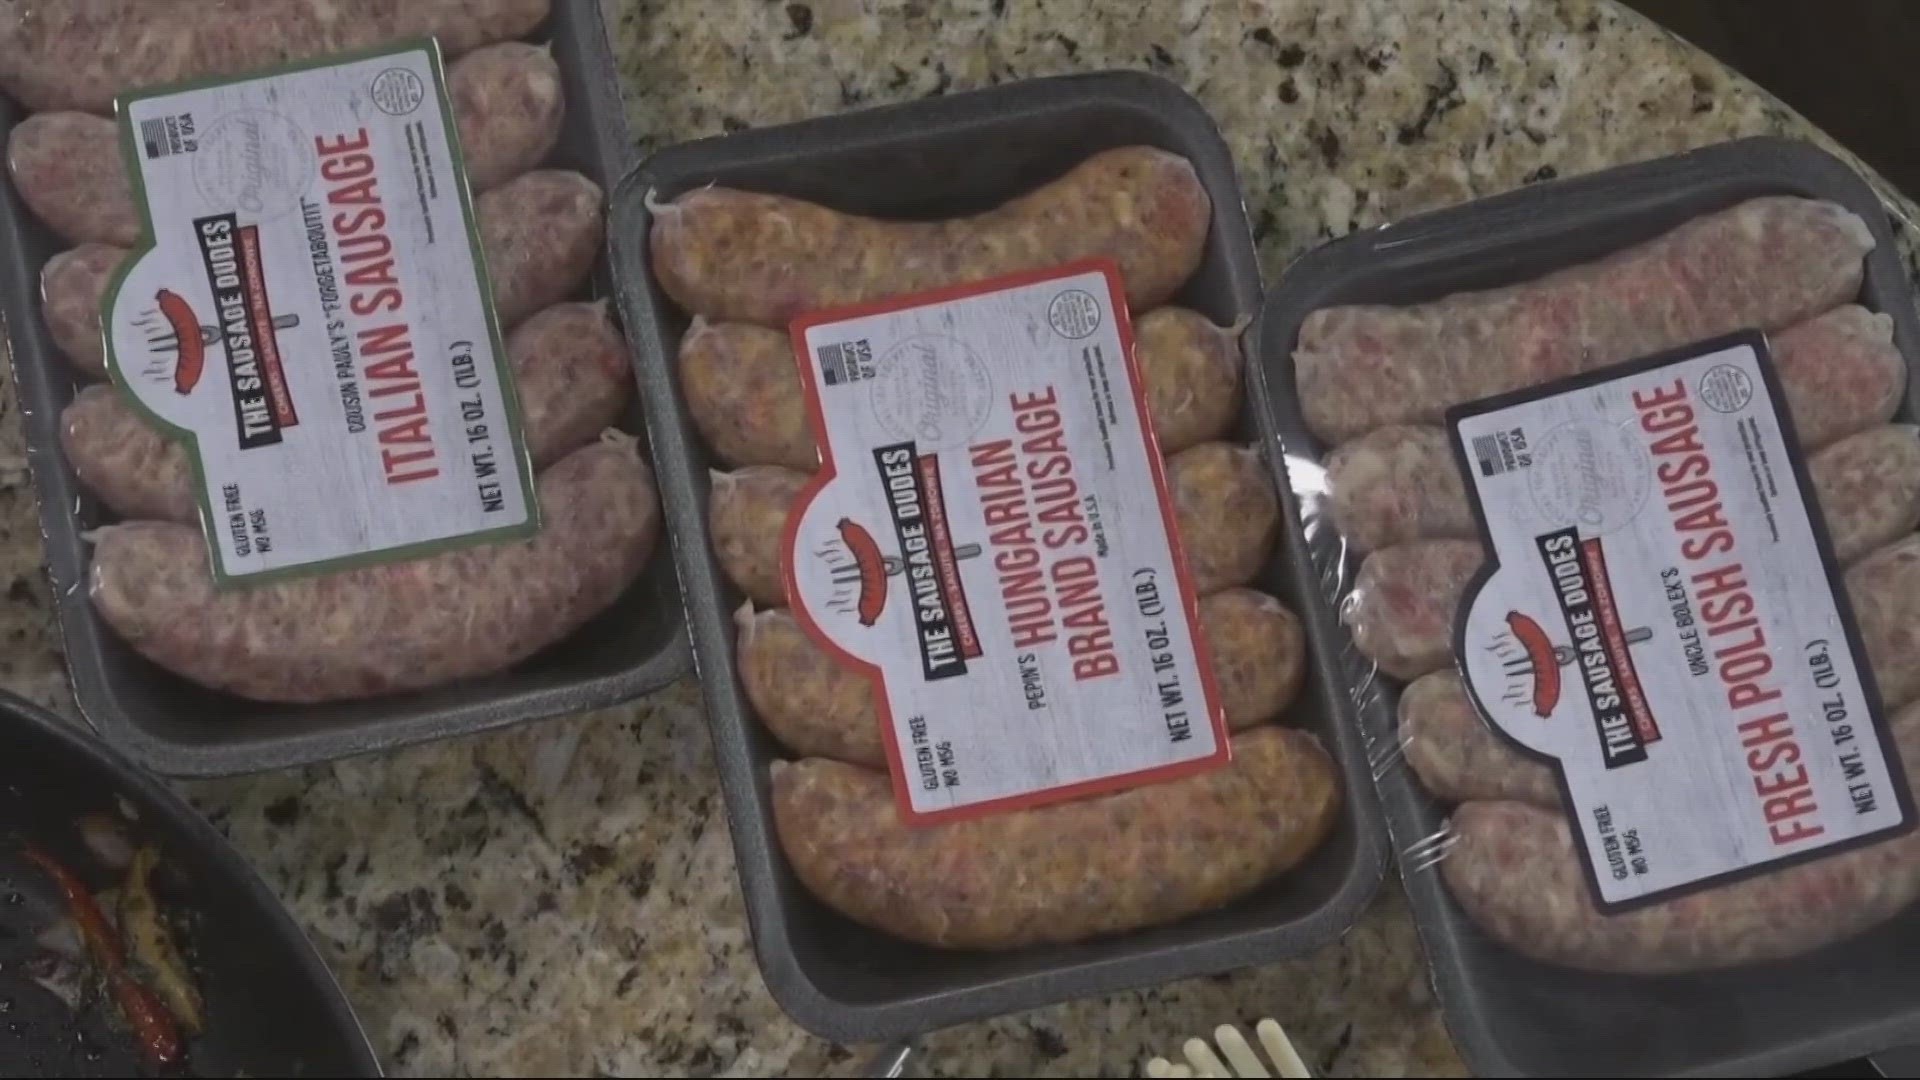 Two Jacksonville men started a company called The Sausage Dudes, which raises money to support youth development in Jacksonville and internationally.